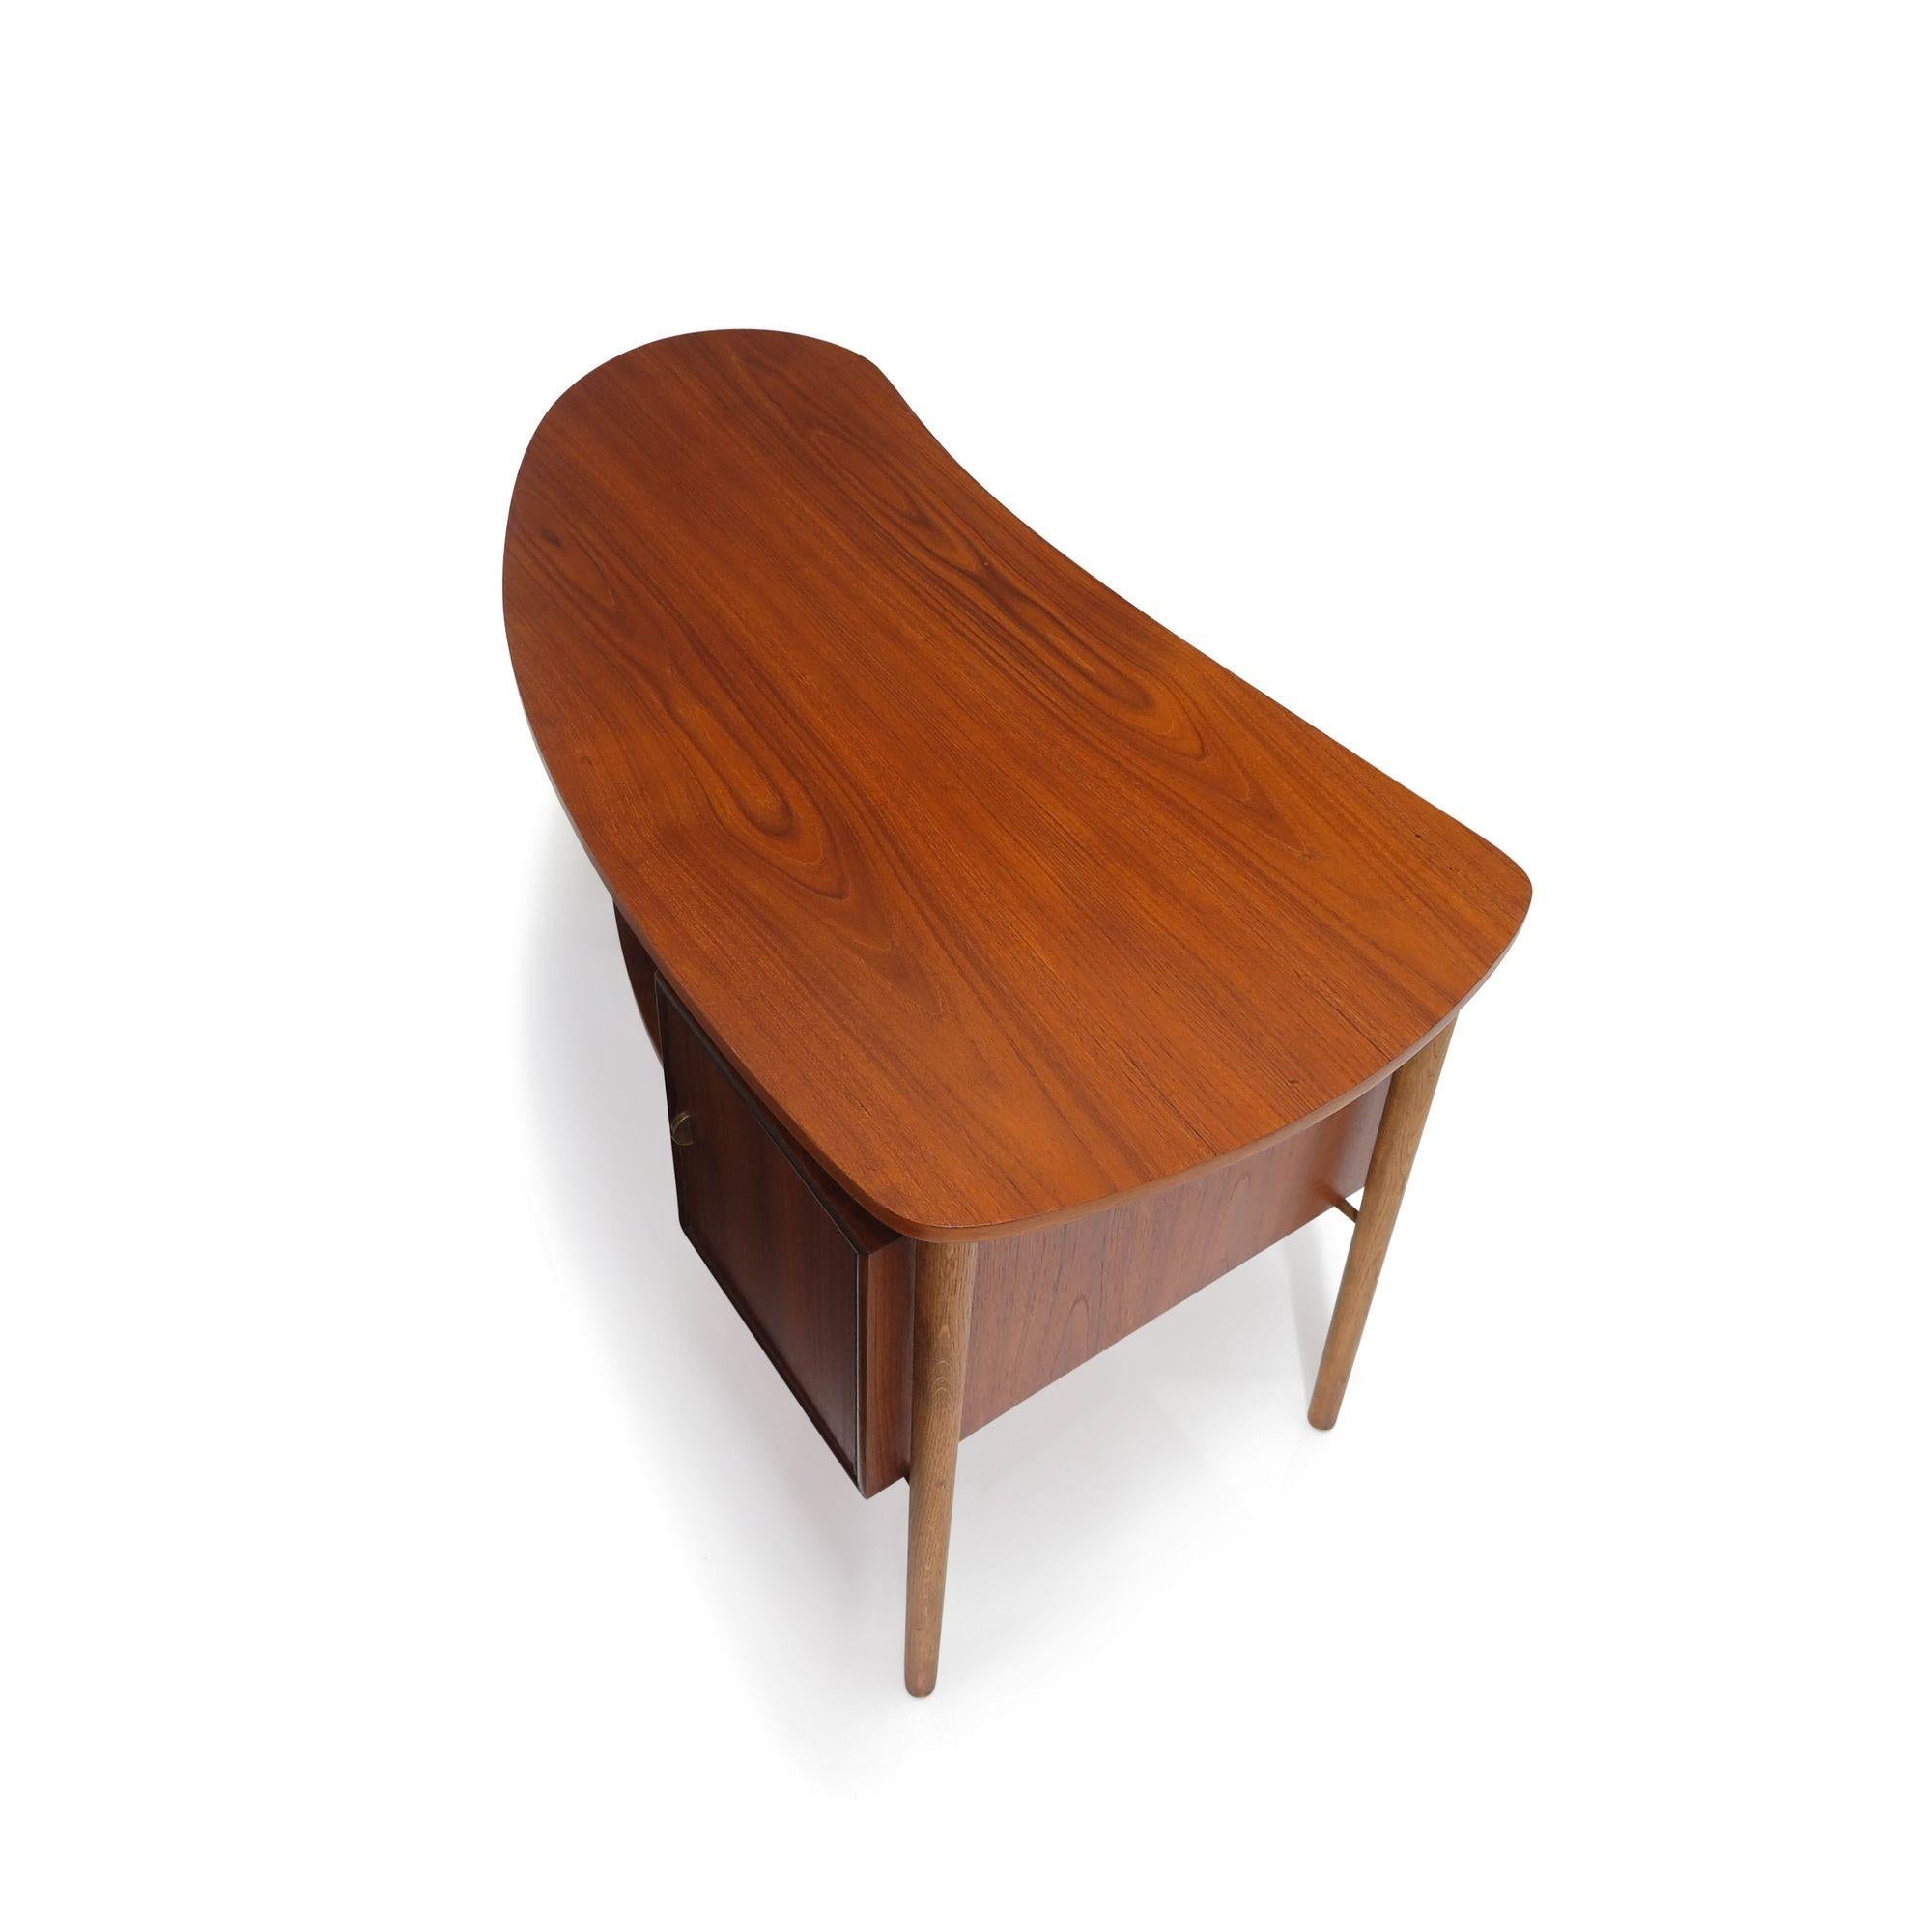 Mid-century Teak Writing Desk Designed by Kai Kristiansen In Excellent Condition For Sale In Oakland, CA